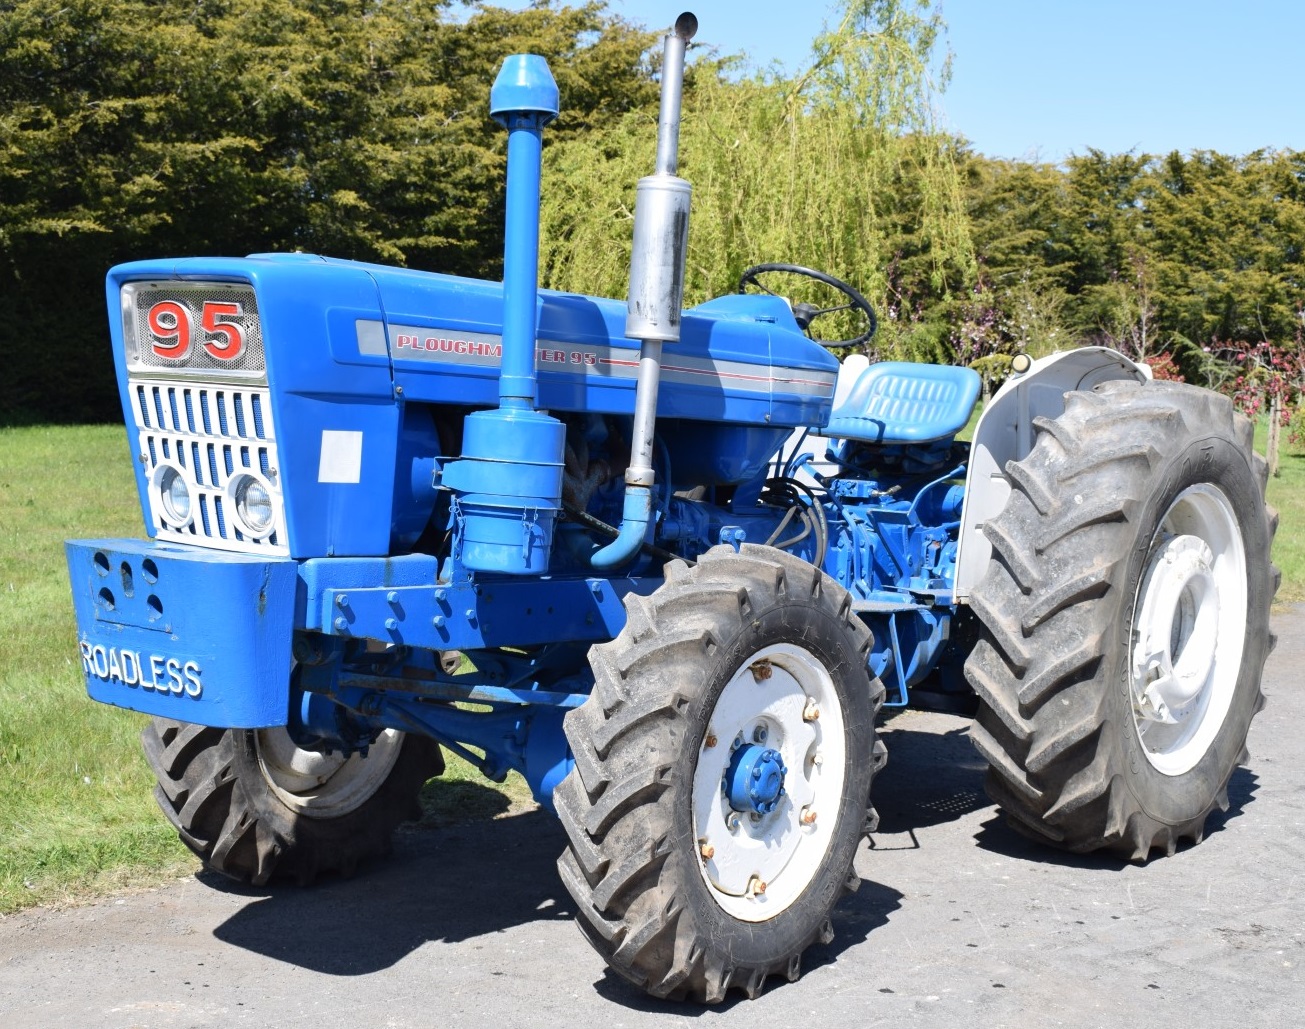 Ford Roadless Ploughmaster 95 tractor, Shropshire registration number NUJ 245G, with V5c listing - Image 6 of 11